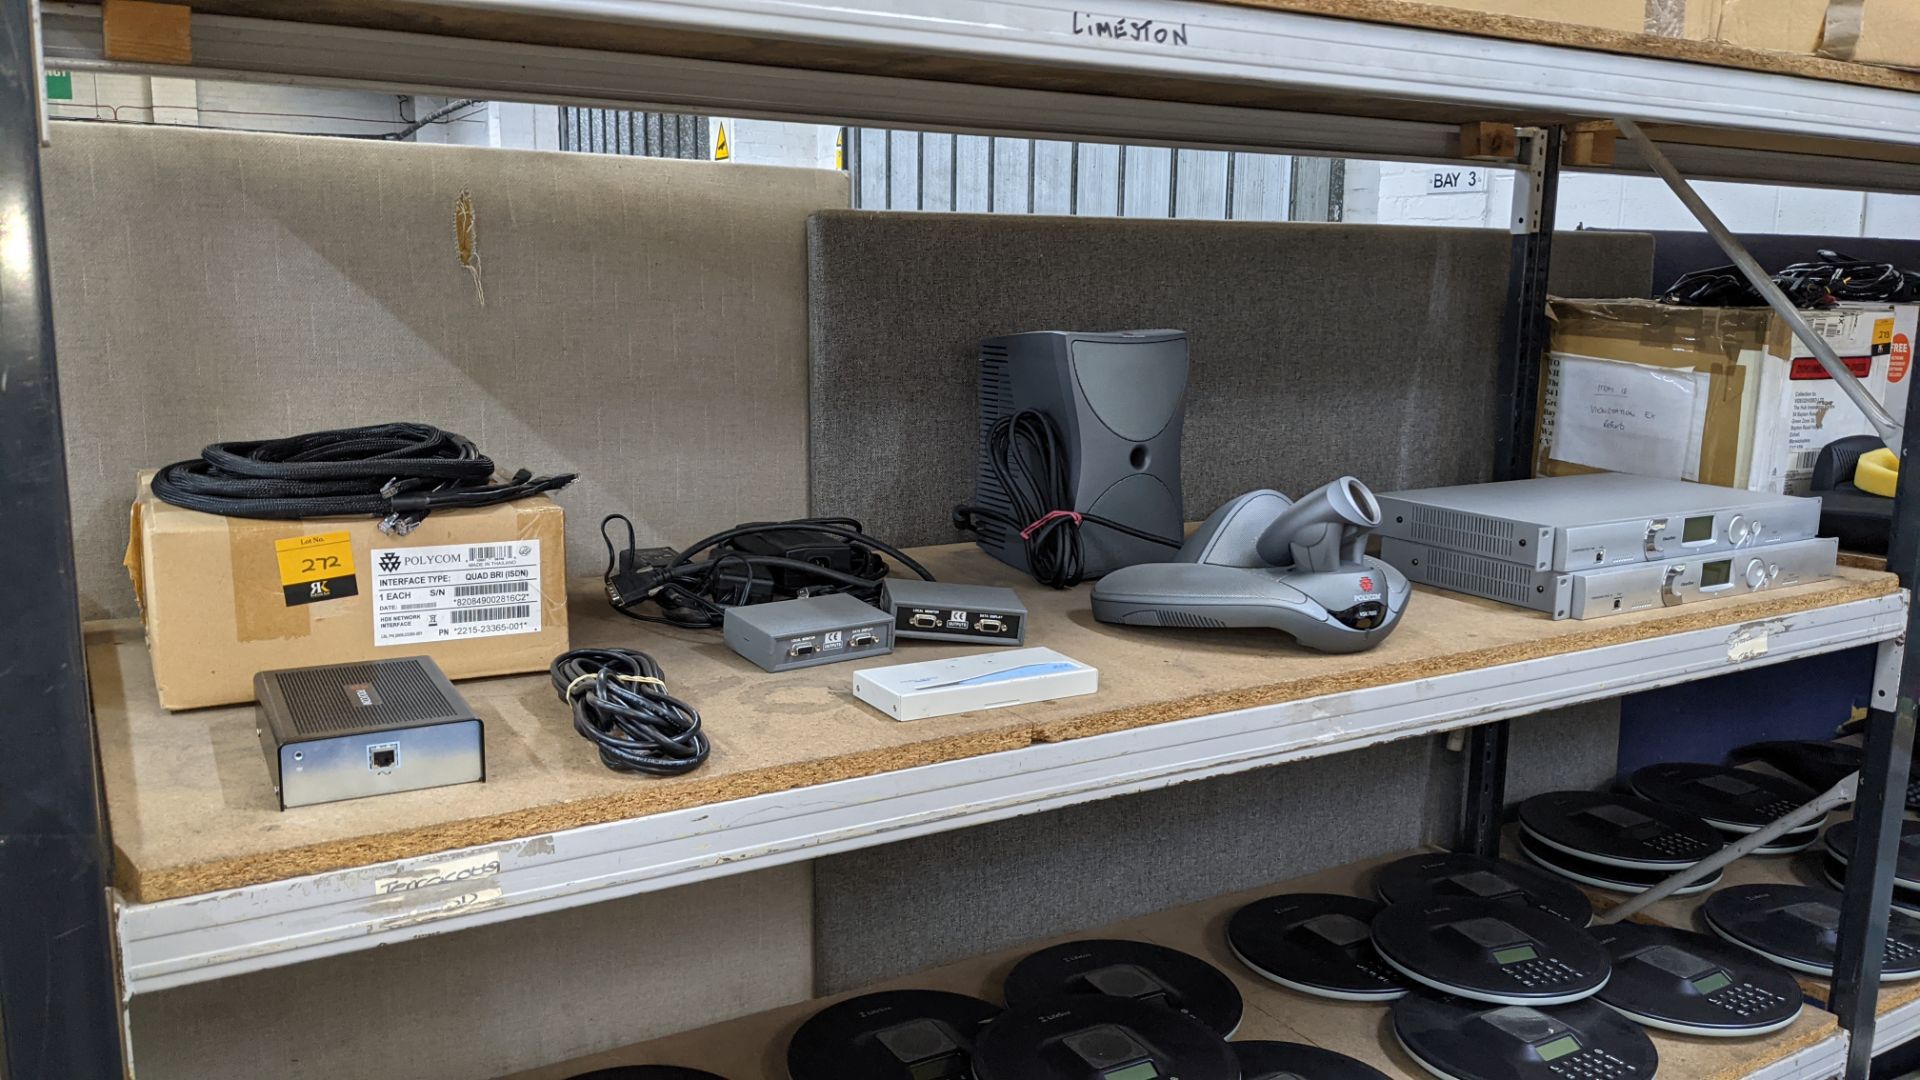 Contents of a shelf of assorted video conferencing equipment by Polycom & others, including ClearOne - Image 2 of 12